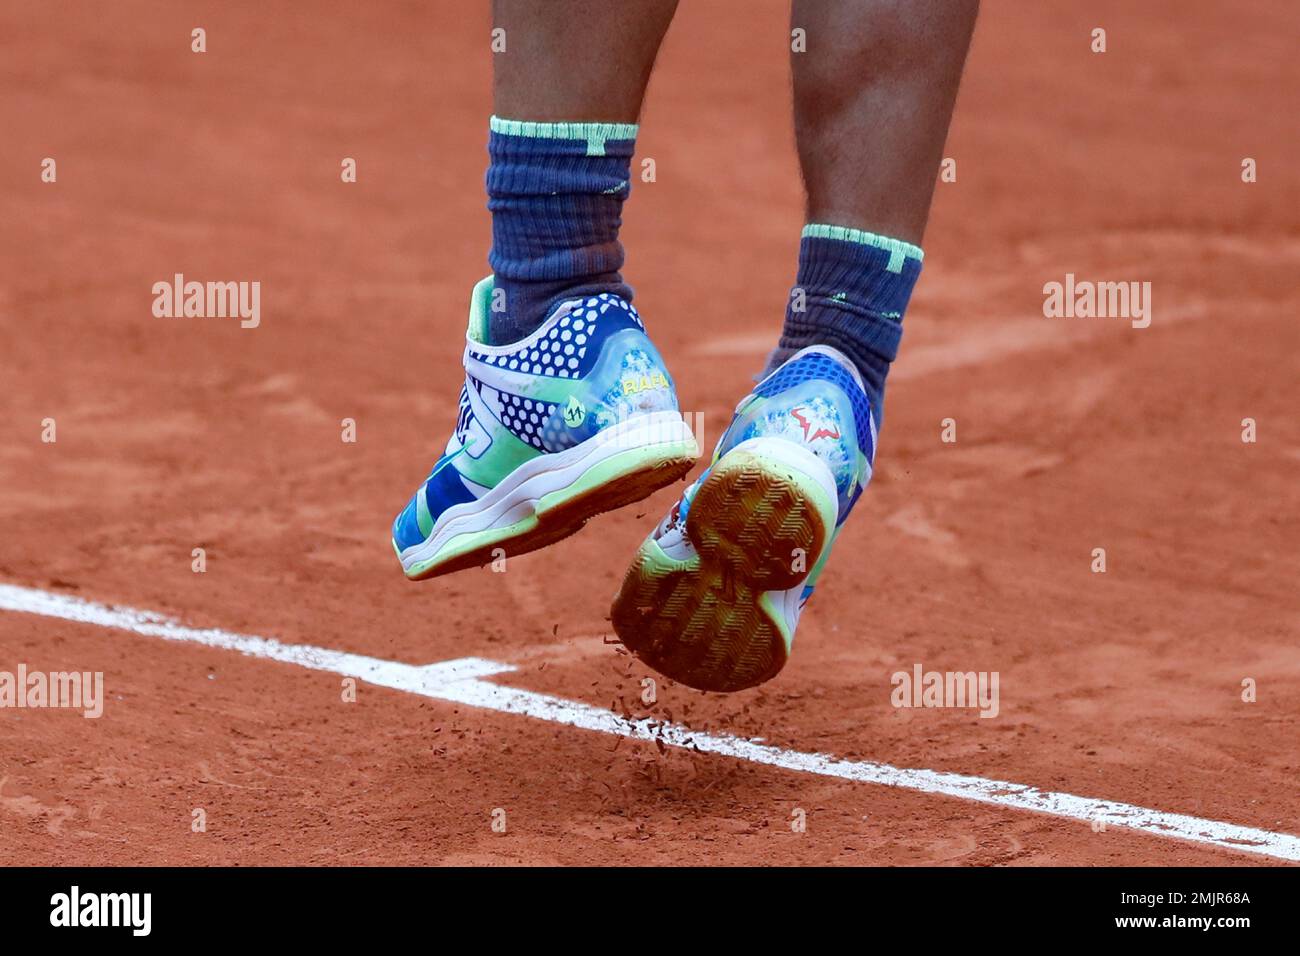 geloof Fragiel Persoon belast met sportgame Spain's Rafael Nadal's shoes are seen as he serves against Austria's  Dominic Thiem during the men's finalmatch of the French Open tennis  tournament at the Roland Garros stadium in Paris, Sunday, June